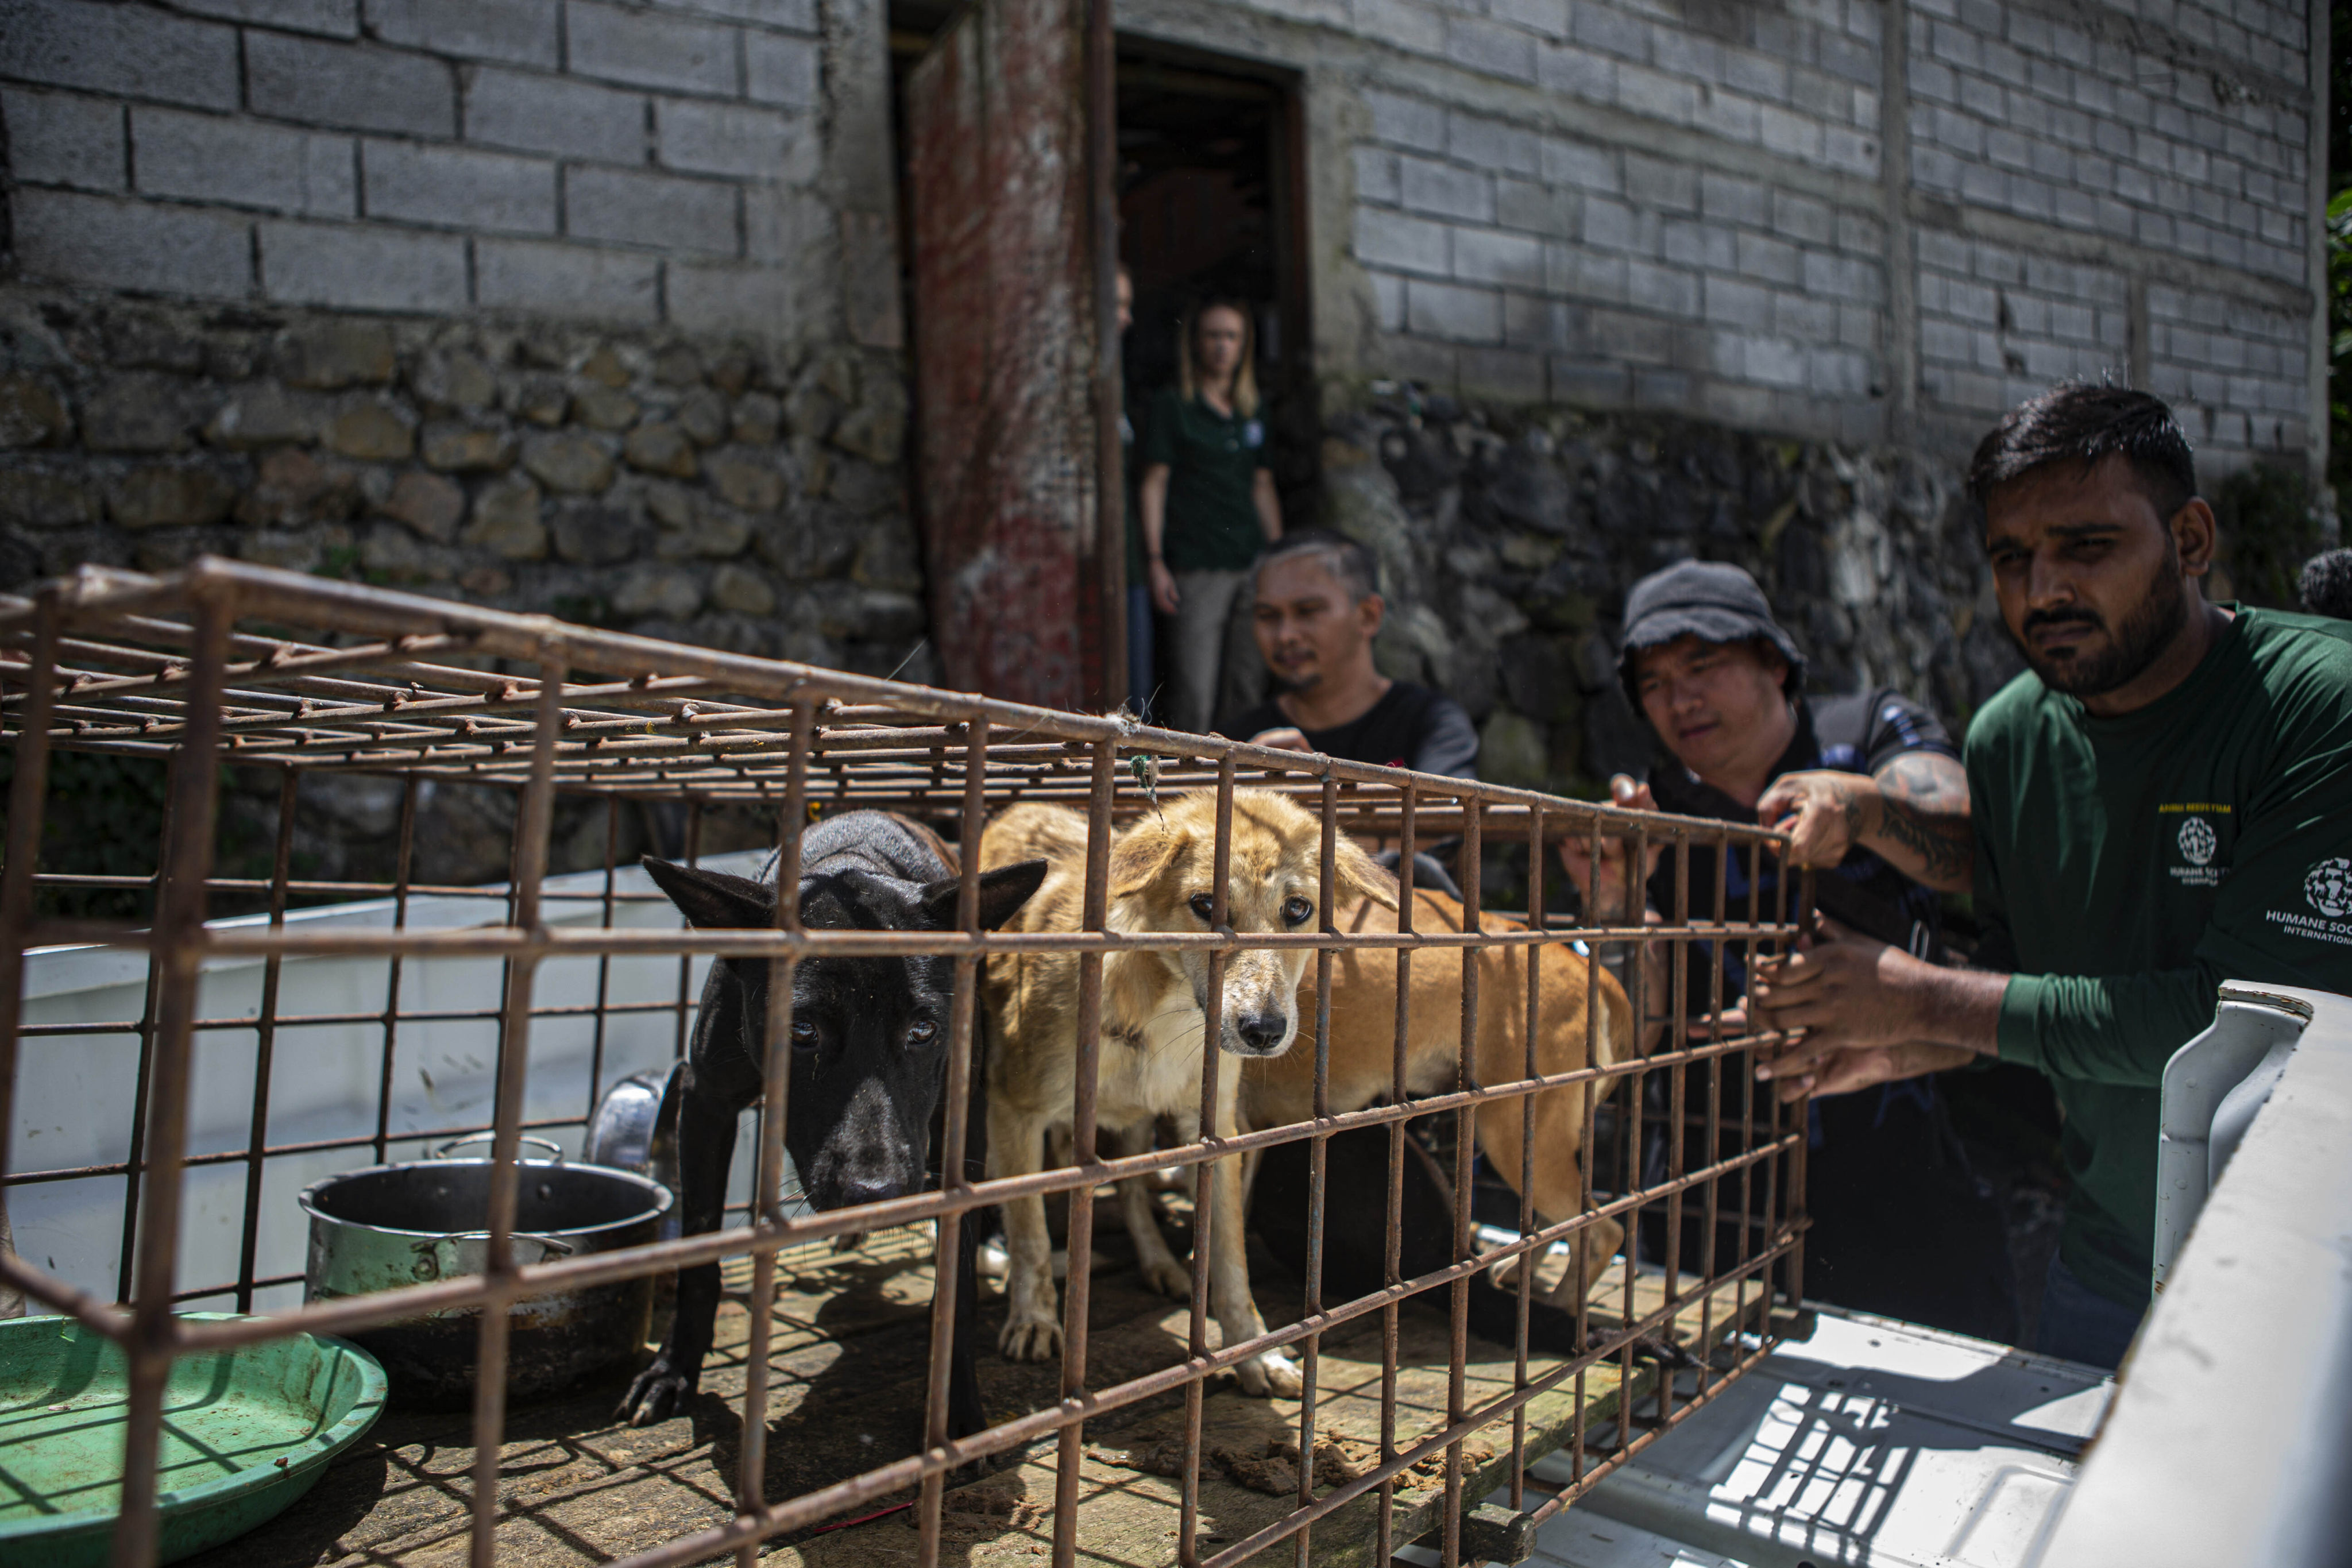 Members of anti-animal cruelty group Humane Society International rescue dogs from a slaughterhouse in Tomohon, North Sulawesi. Photo: AP